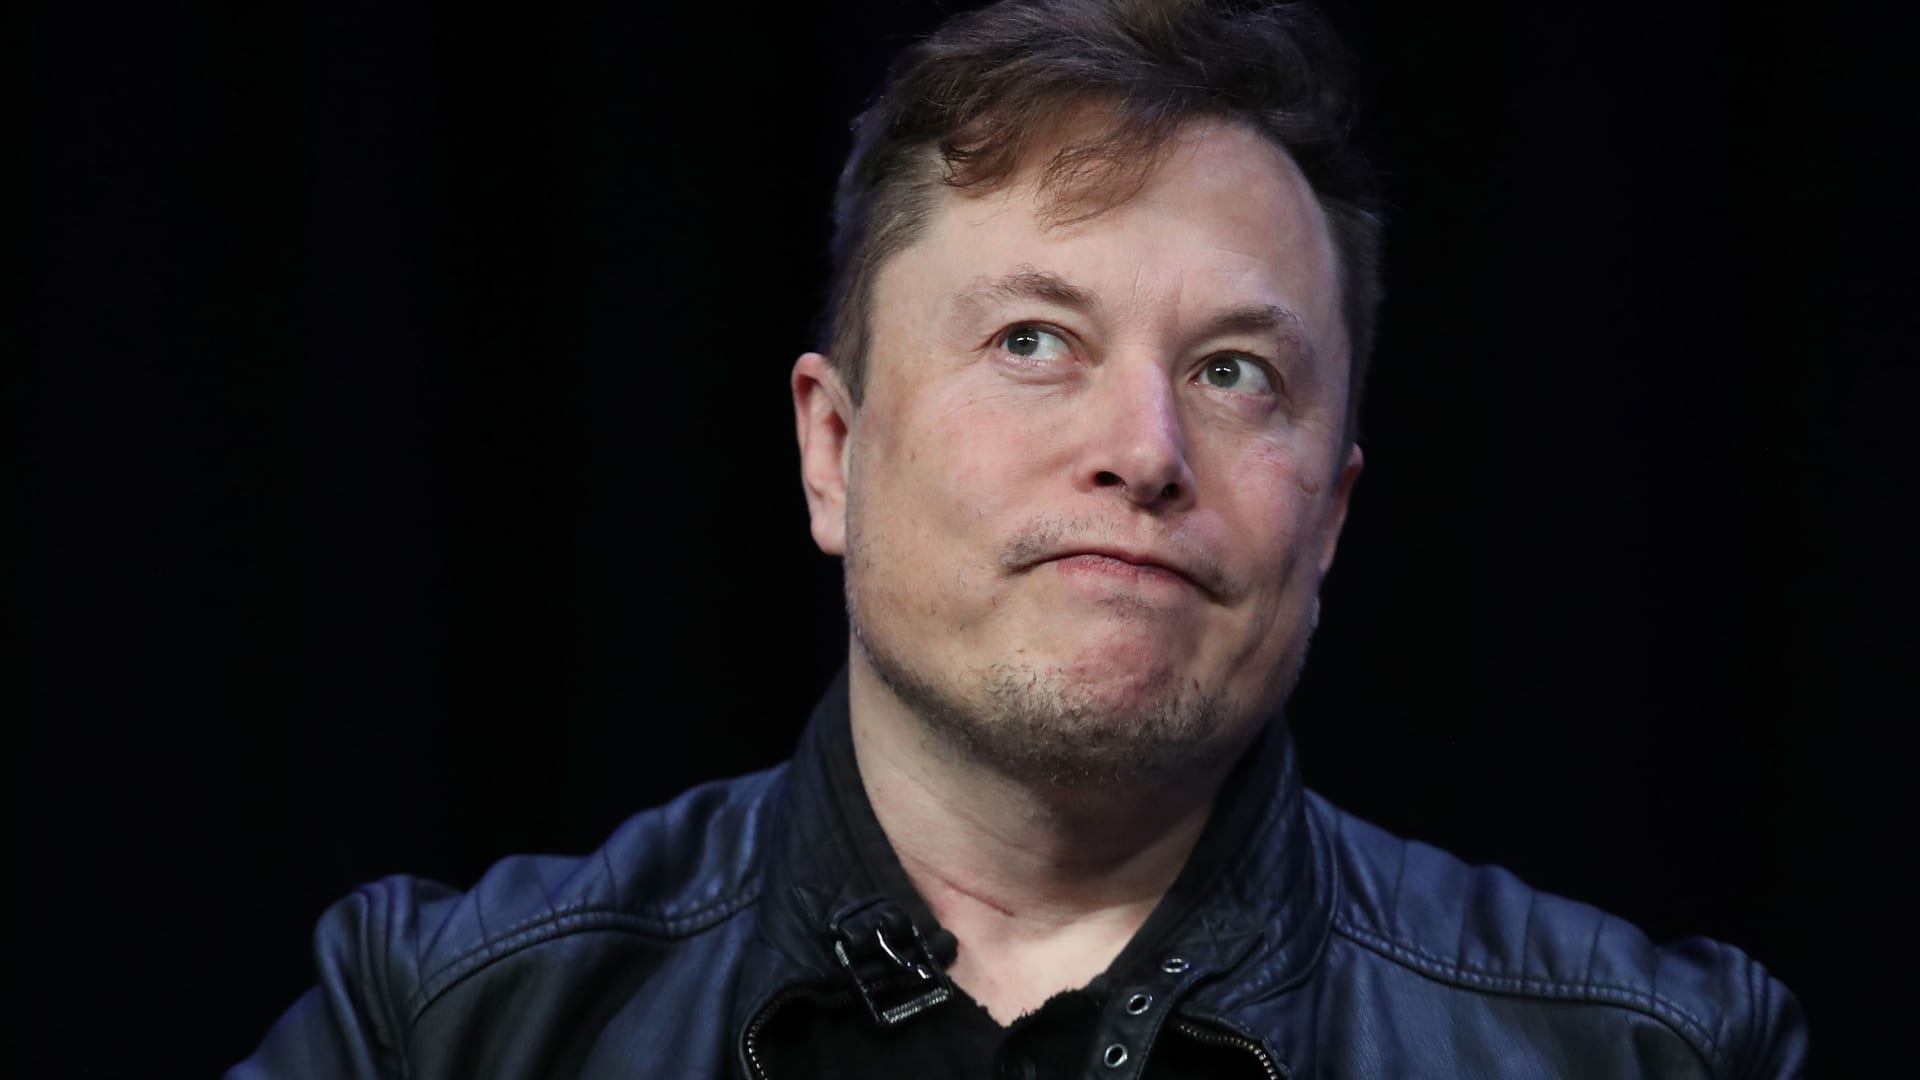 Elon Musk wants to pause ‘dangerous’ AI development. Bill Gates disagrees—and he’s not the only one